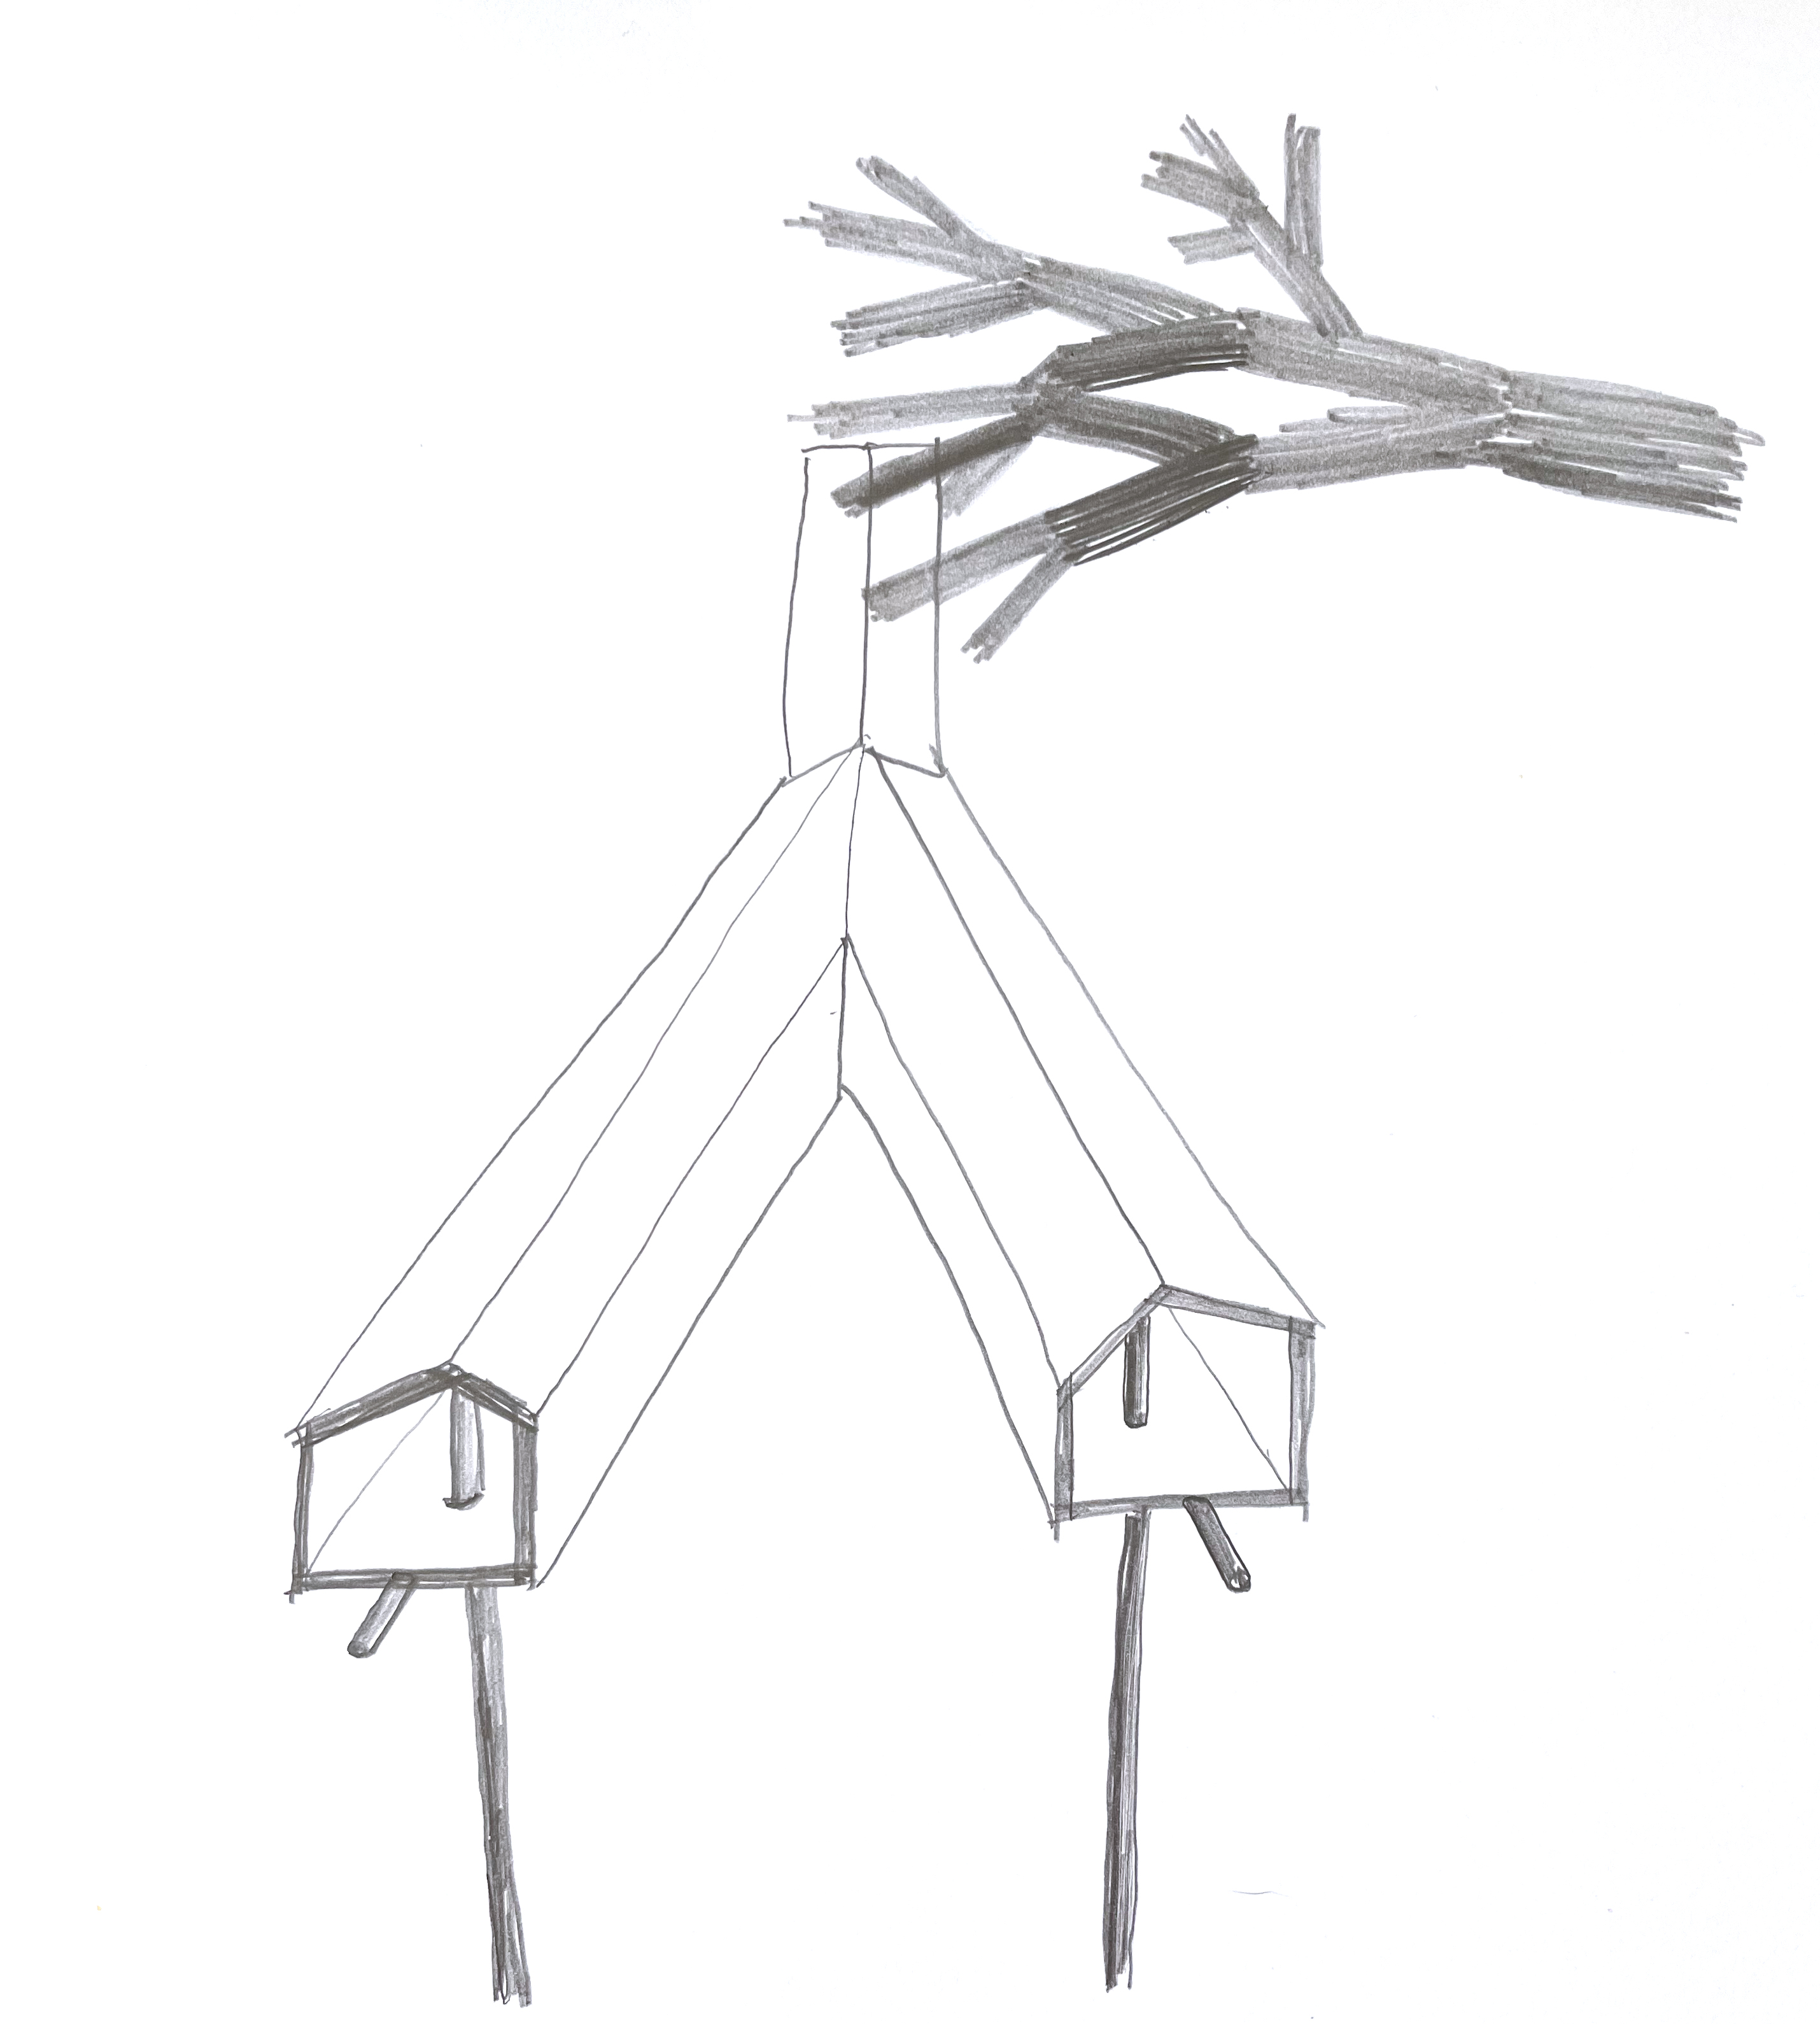 a branch drawn in pencil hangs over a double-barreled birdhouse, a birdhouse in a Y-shape with two separate entrances